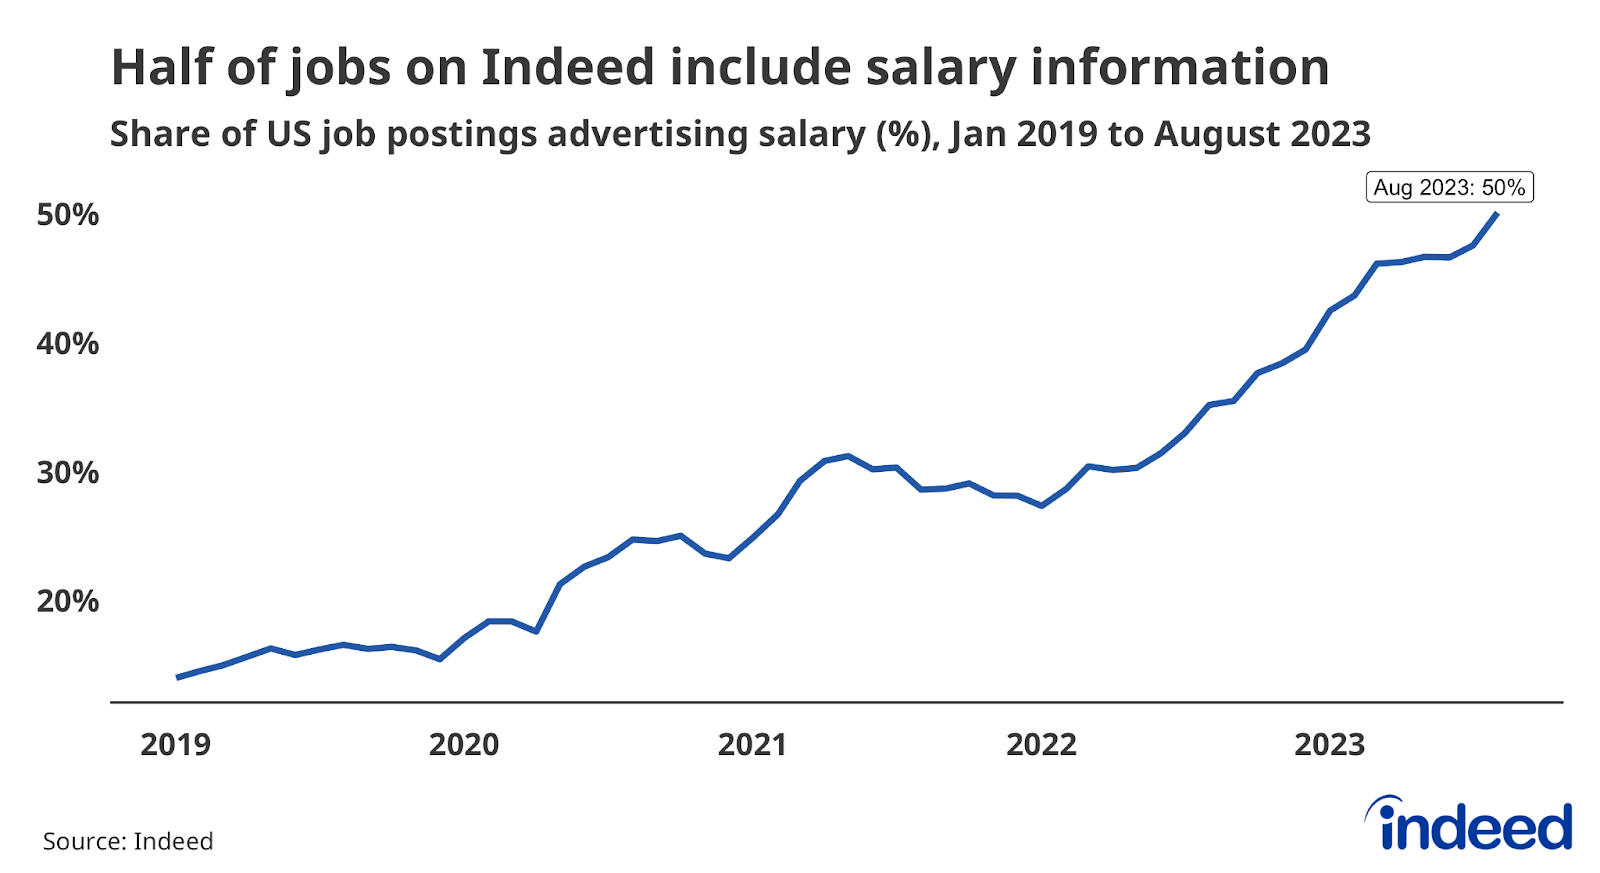 Line graph titled “Half of jobs on Indeed include salary information” with a vertical axis ranging from 20% to 50%. Indeed tracked the percentage share of US job postings containing employer-provided salary information monthly from January 2019 to August 2023. The chart shows that the share has increased since early 2020, and reached a series high of 50% in August 2023.